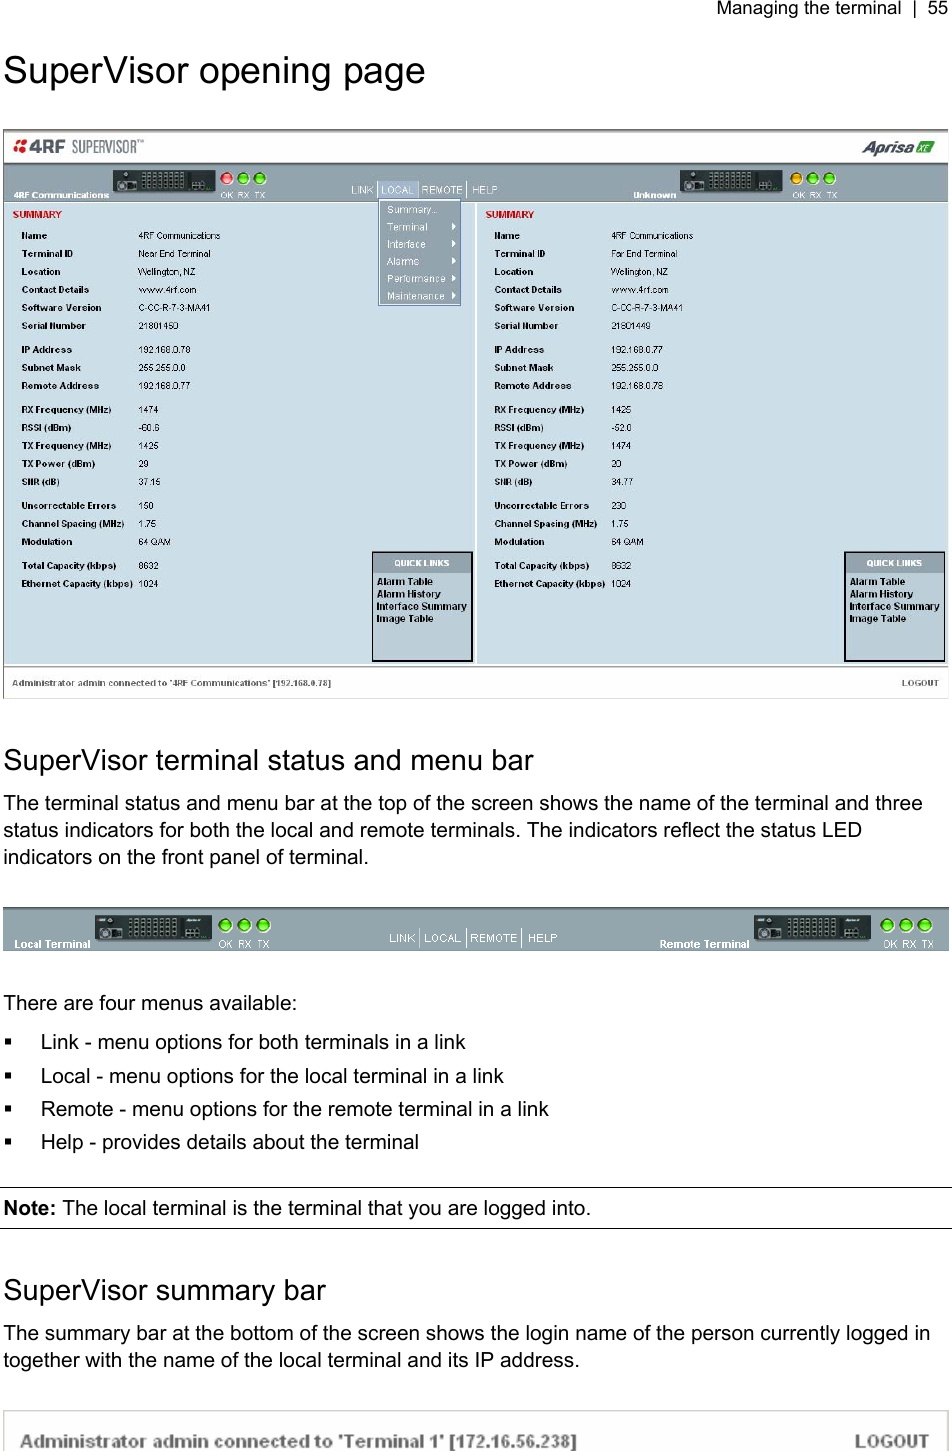 Managing the terminal  |  55   SuperVisor opening page    SuperVisor terminal status and menu bar The terminal status and menu bar at the top of the screen shows the name of the terminal and three status indicators for both the local and remote terminals. The indicators reflect the status LED indicators on the front panel of terminal.    There are four menus available:   Link - menu options for both terminals in a link   Local - menu options for the local terminal in a link   Remote - menu options for the remote terminal in a link   Help - provides details about the terminal  Note: The local terminal is the terminal that you are logged into.   SuperVisor summary bar The summary bar at the bottom of the screen shows the login name of the person currently logged in together with the name of the local terminal and its IP address.     